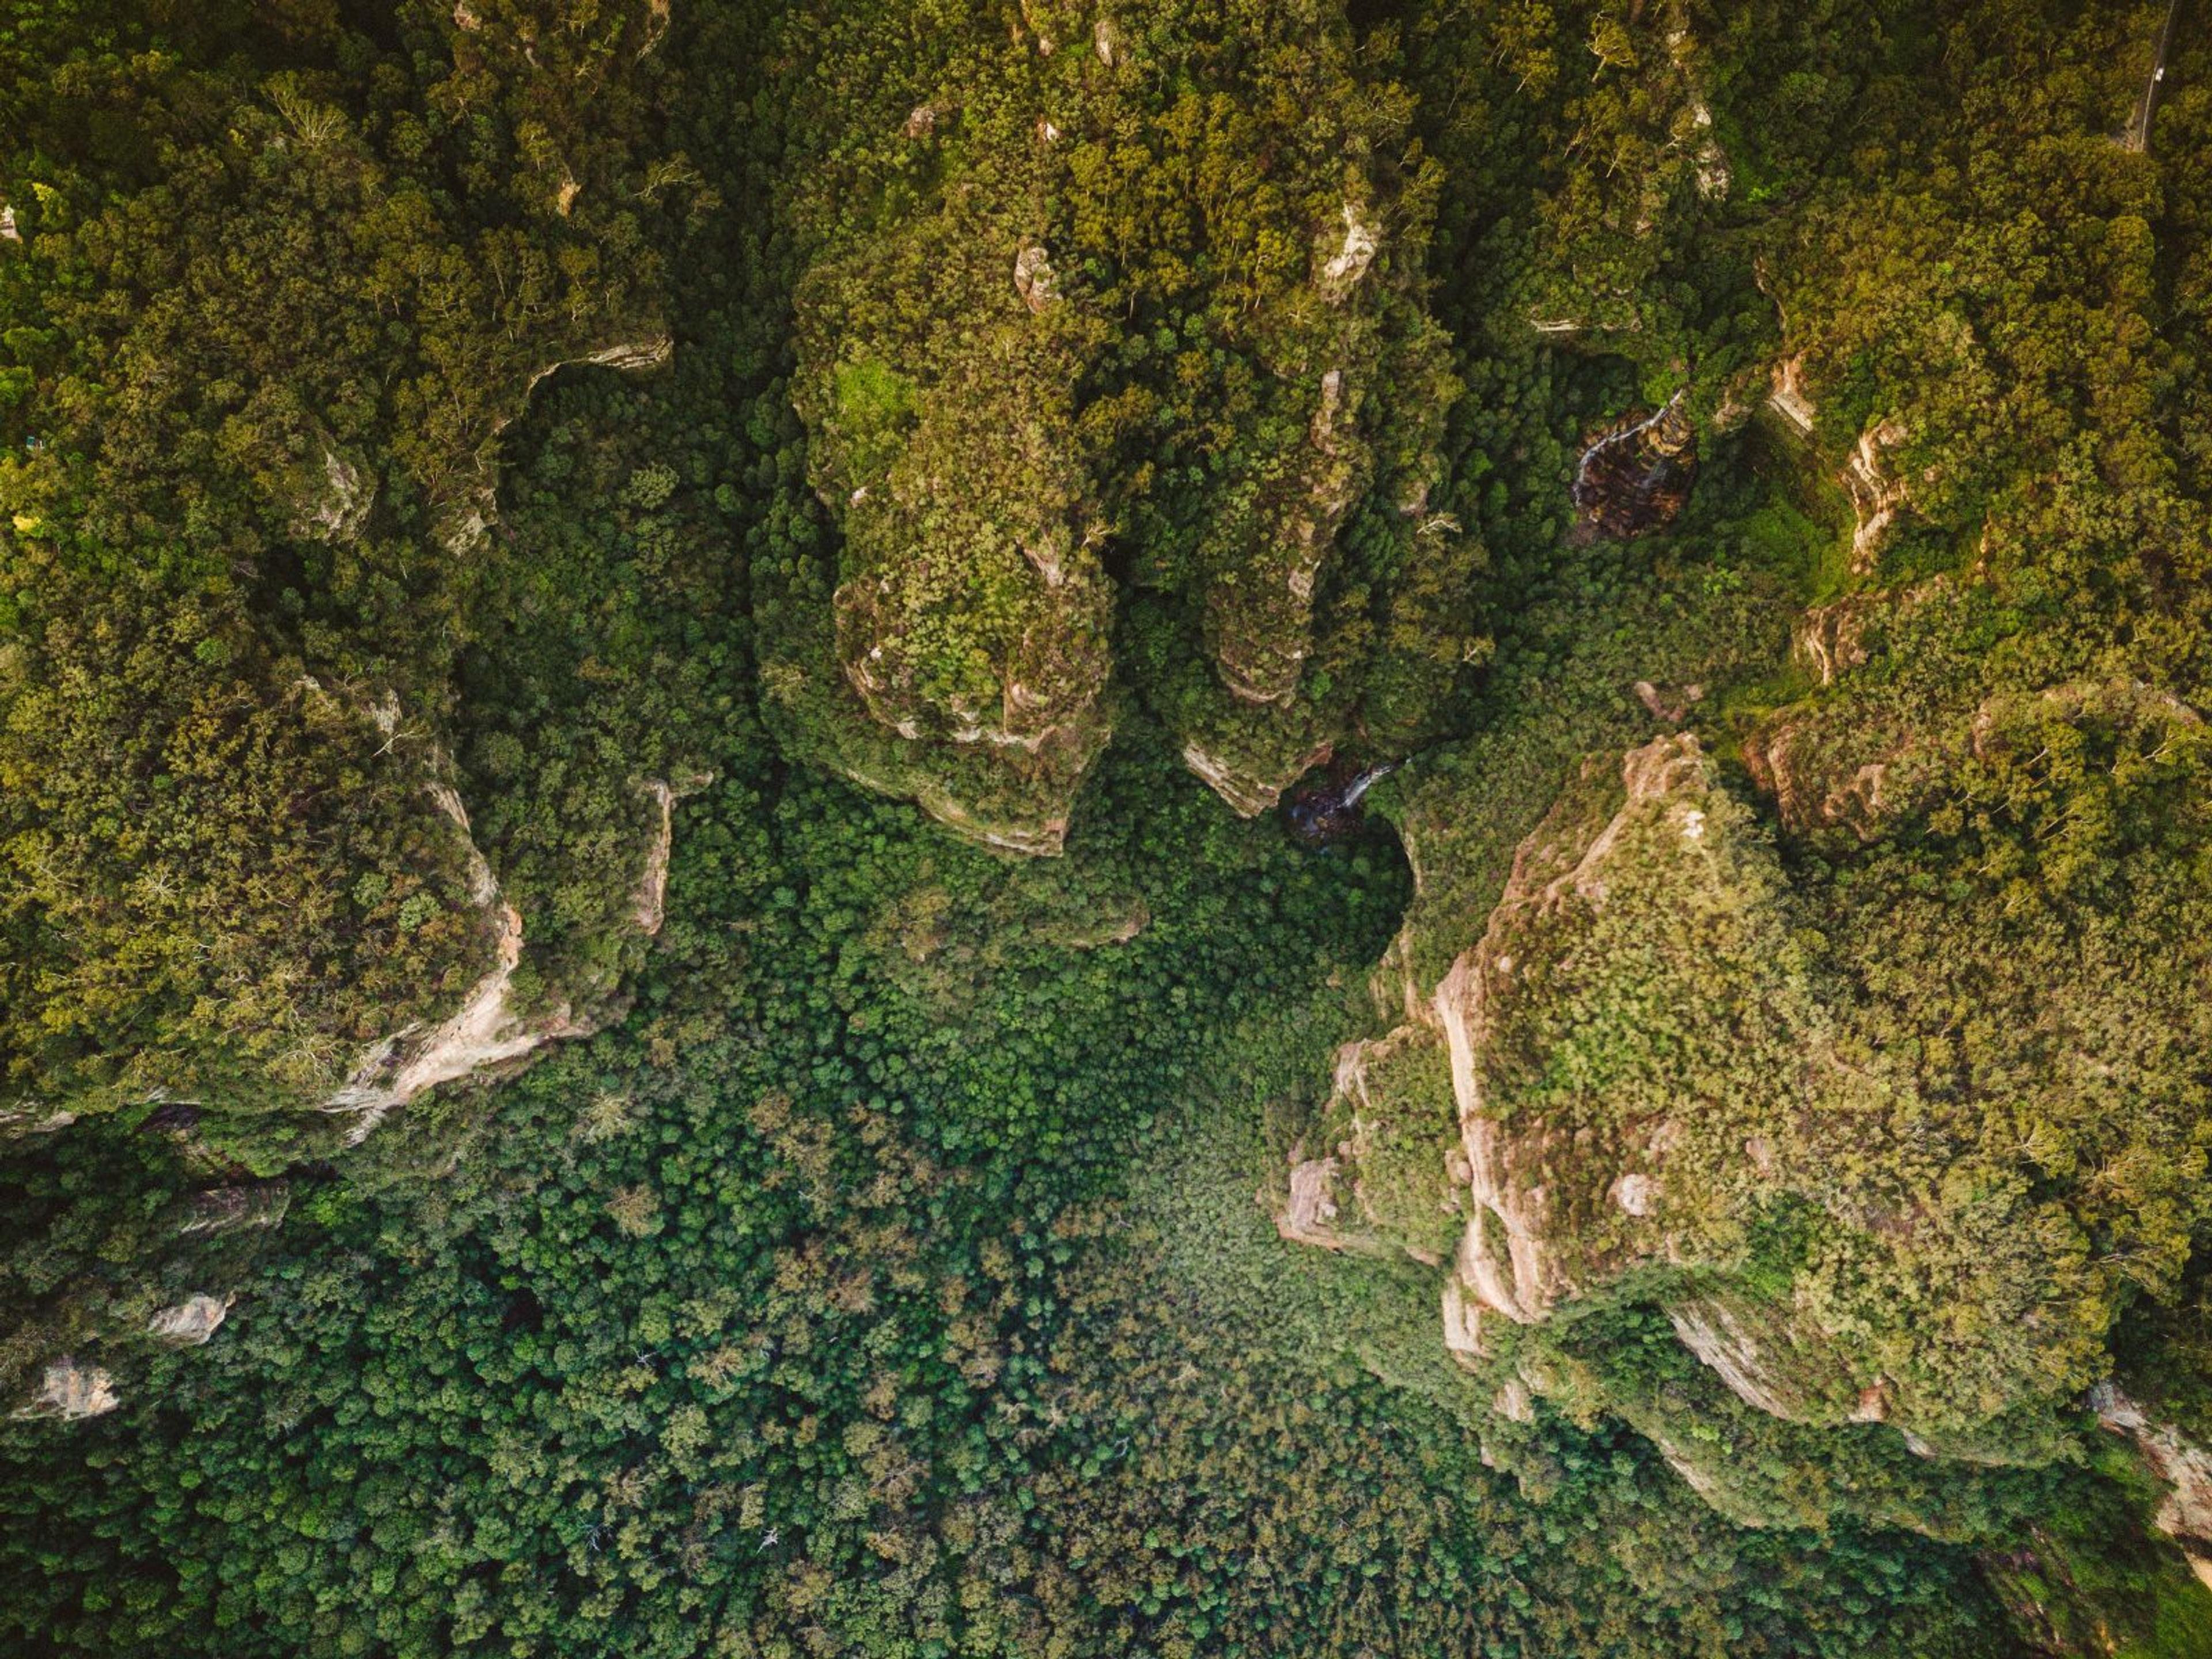 A birds eye view of a hilly forest.